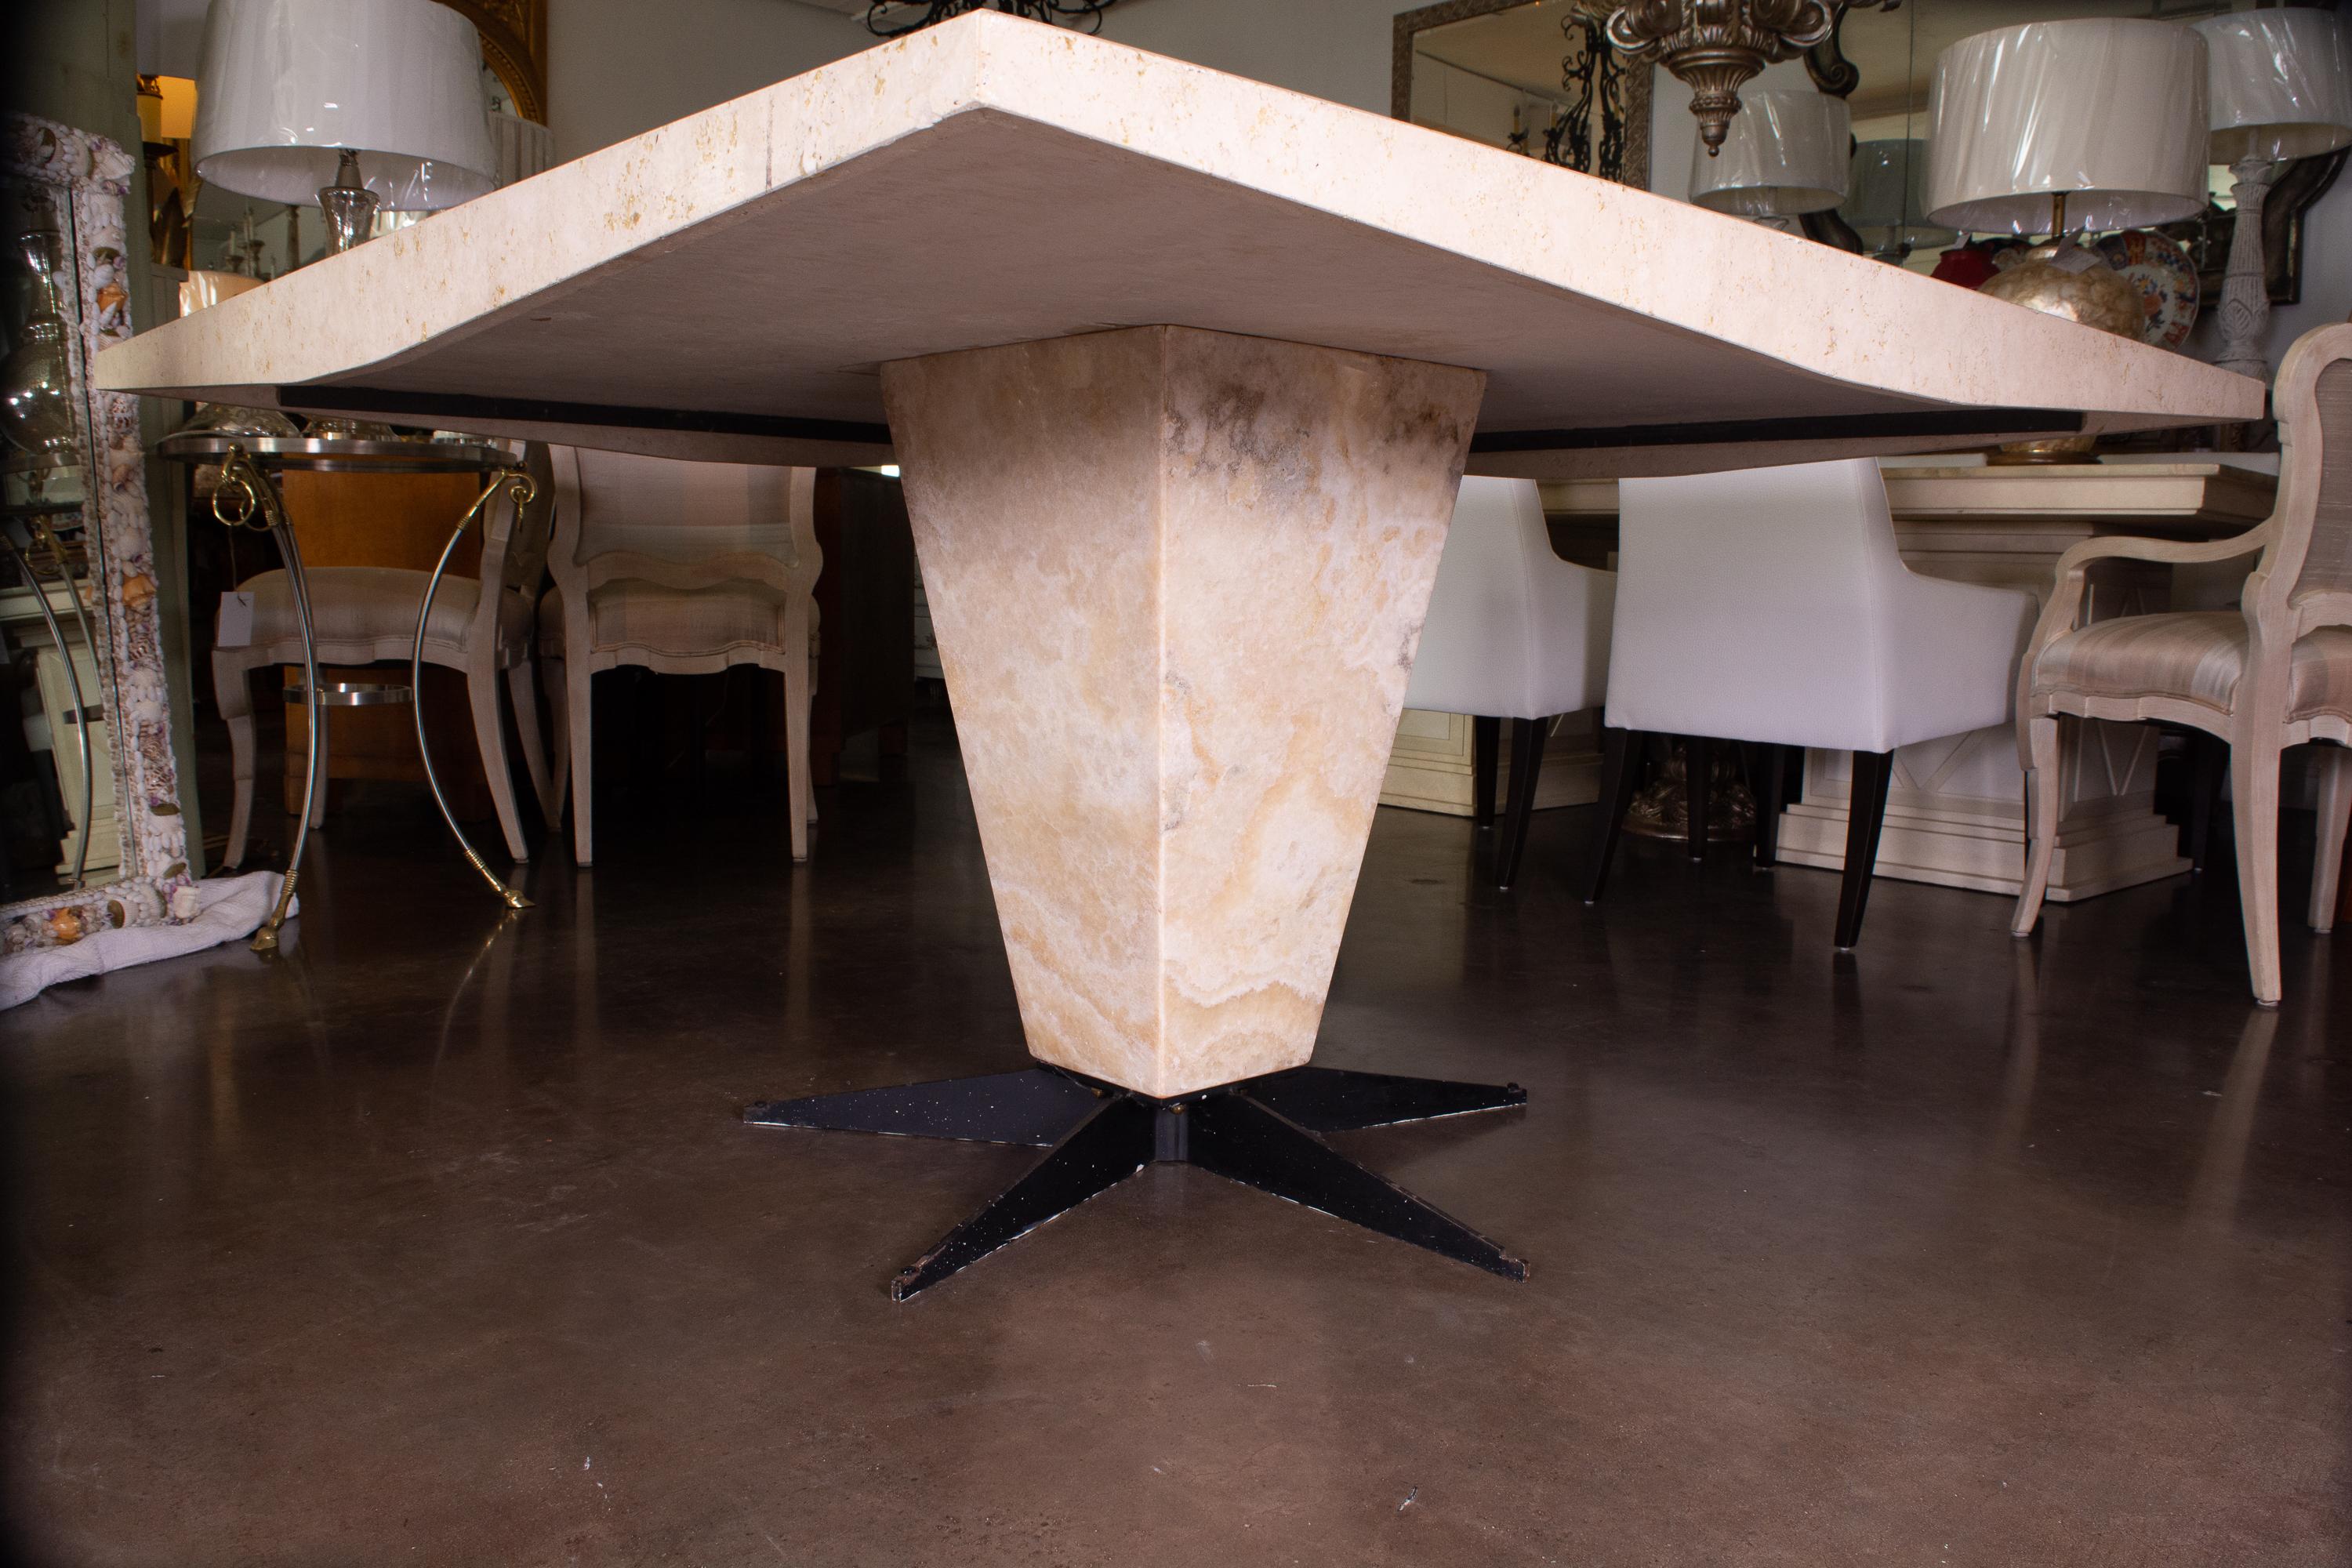 This is a stunning Italian square travertine table. The top has a straight edge and is supported by a large square tapering pedestal situated on a star-form metal base, mid-20th century.